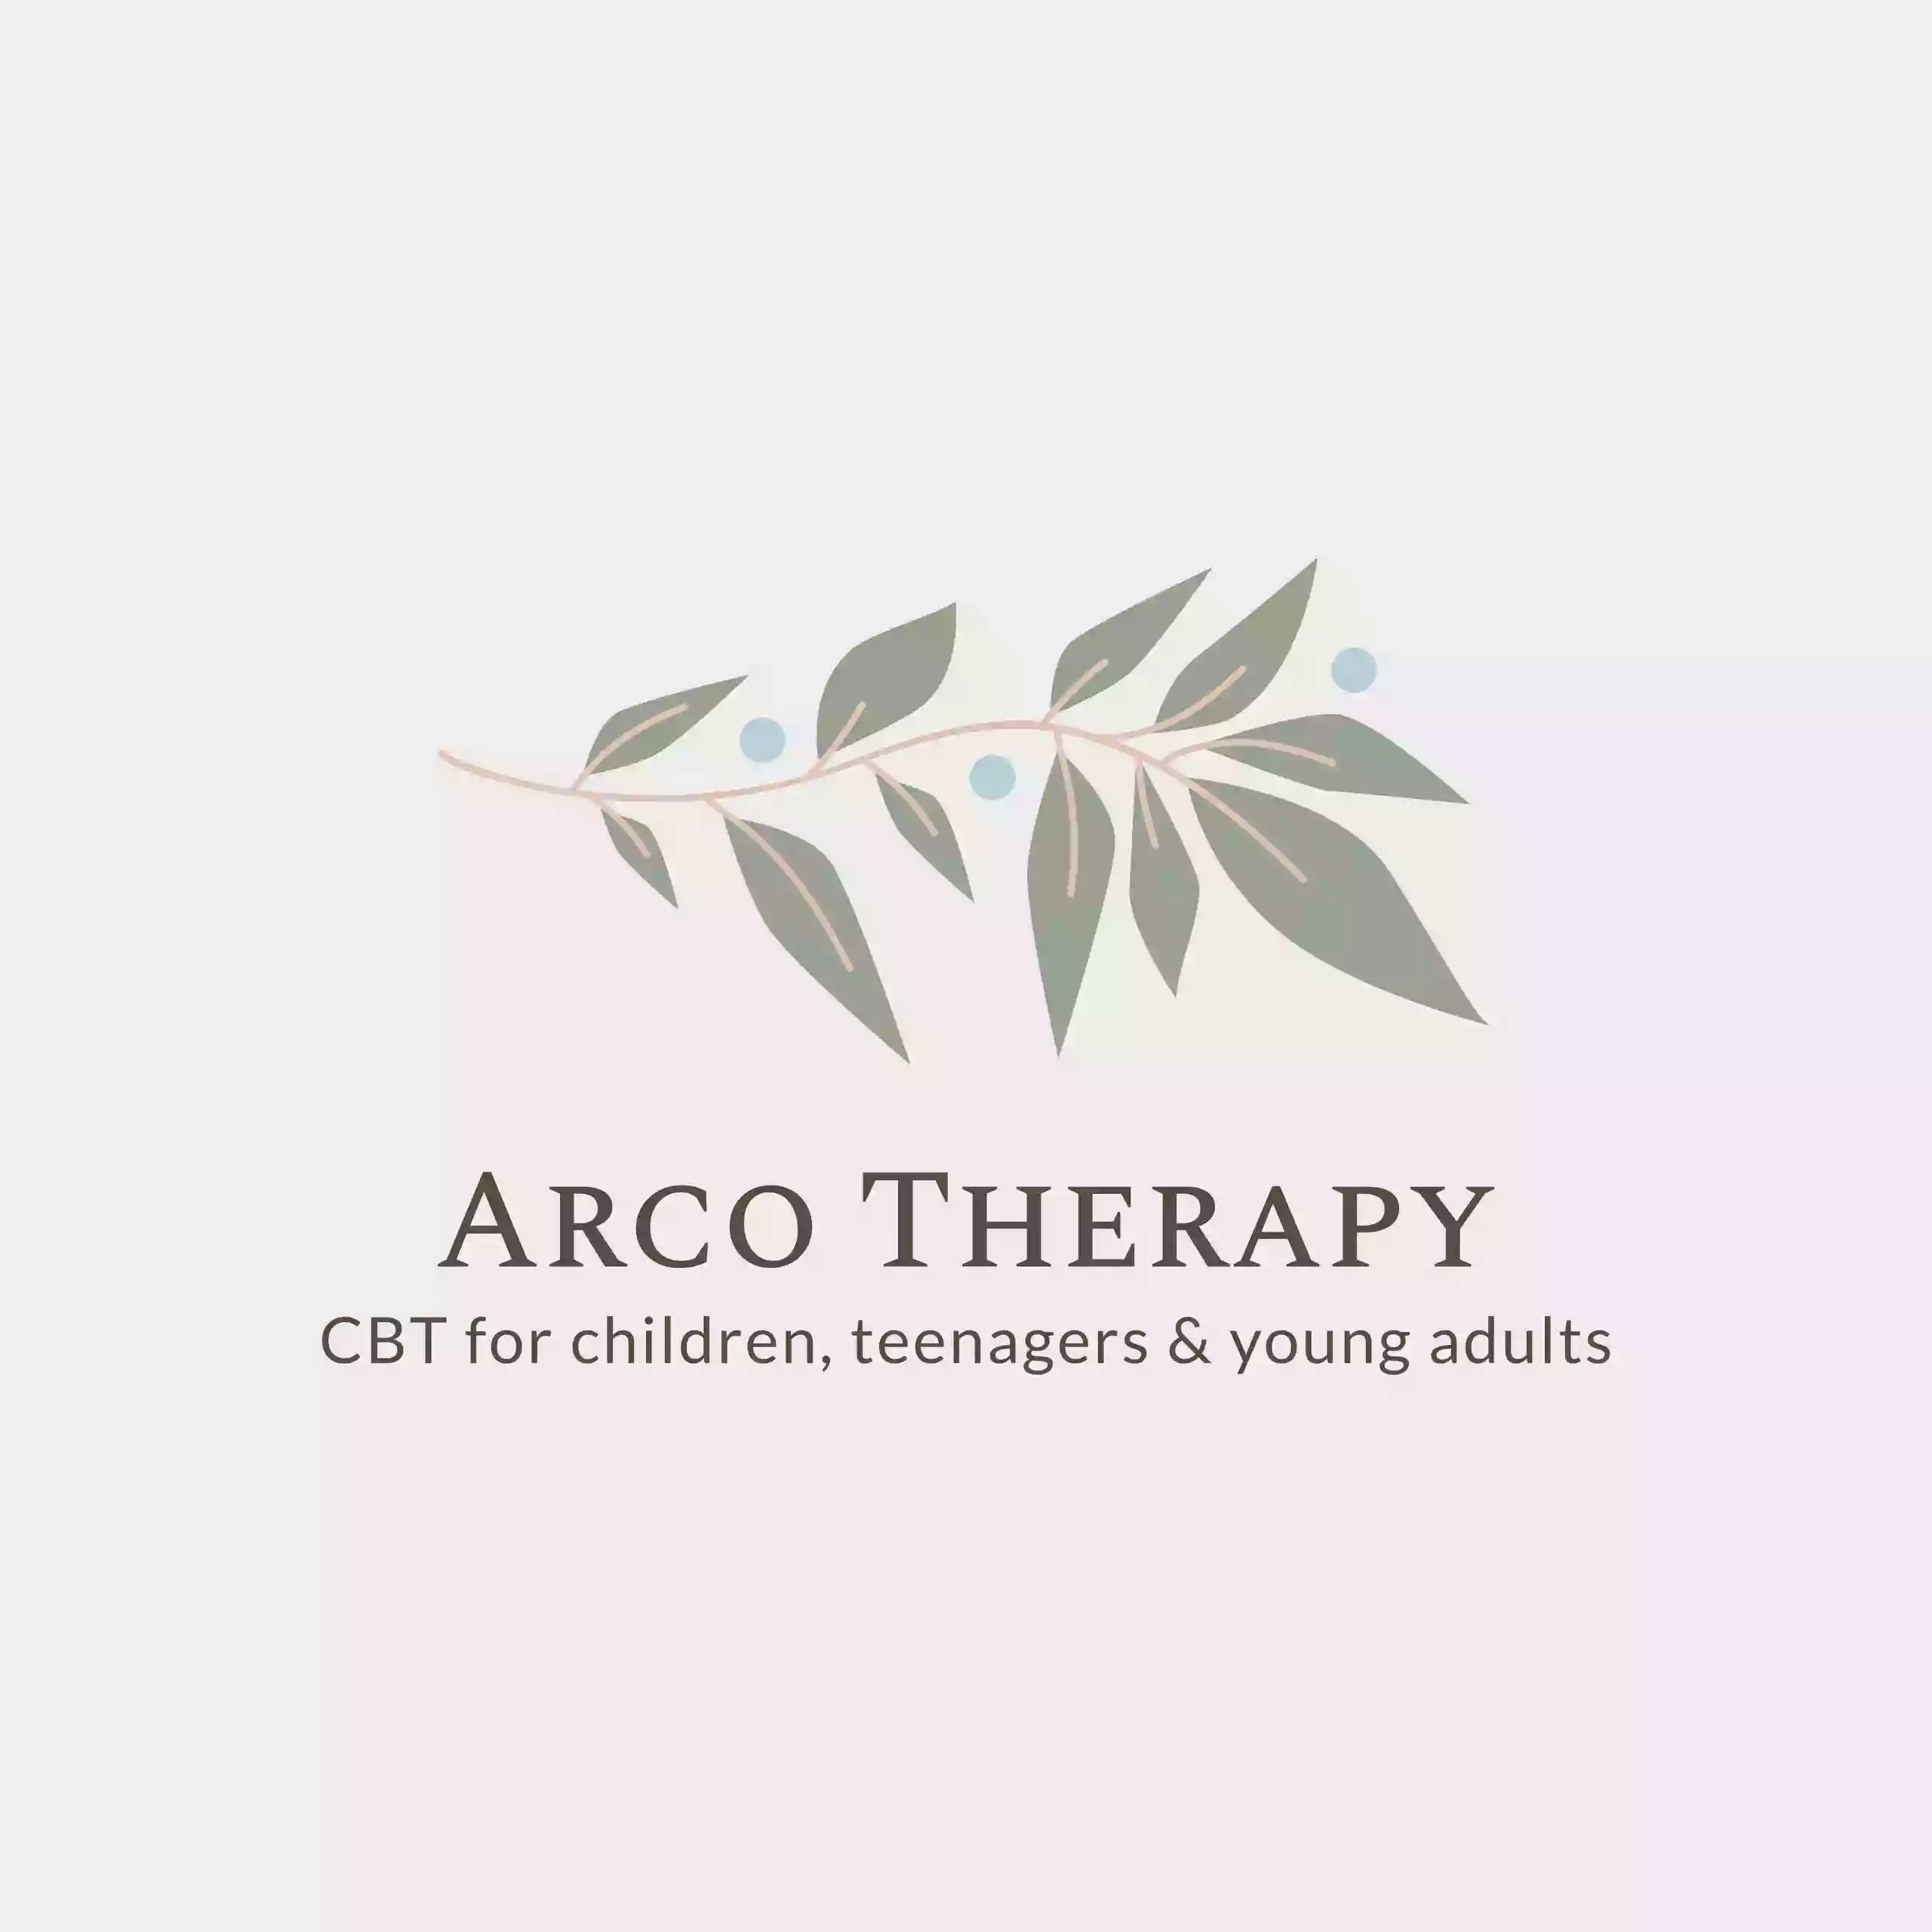 Arco Therapy